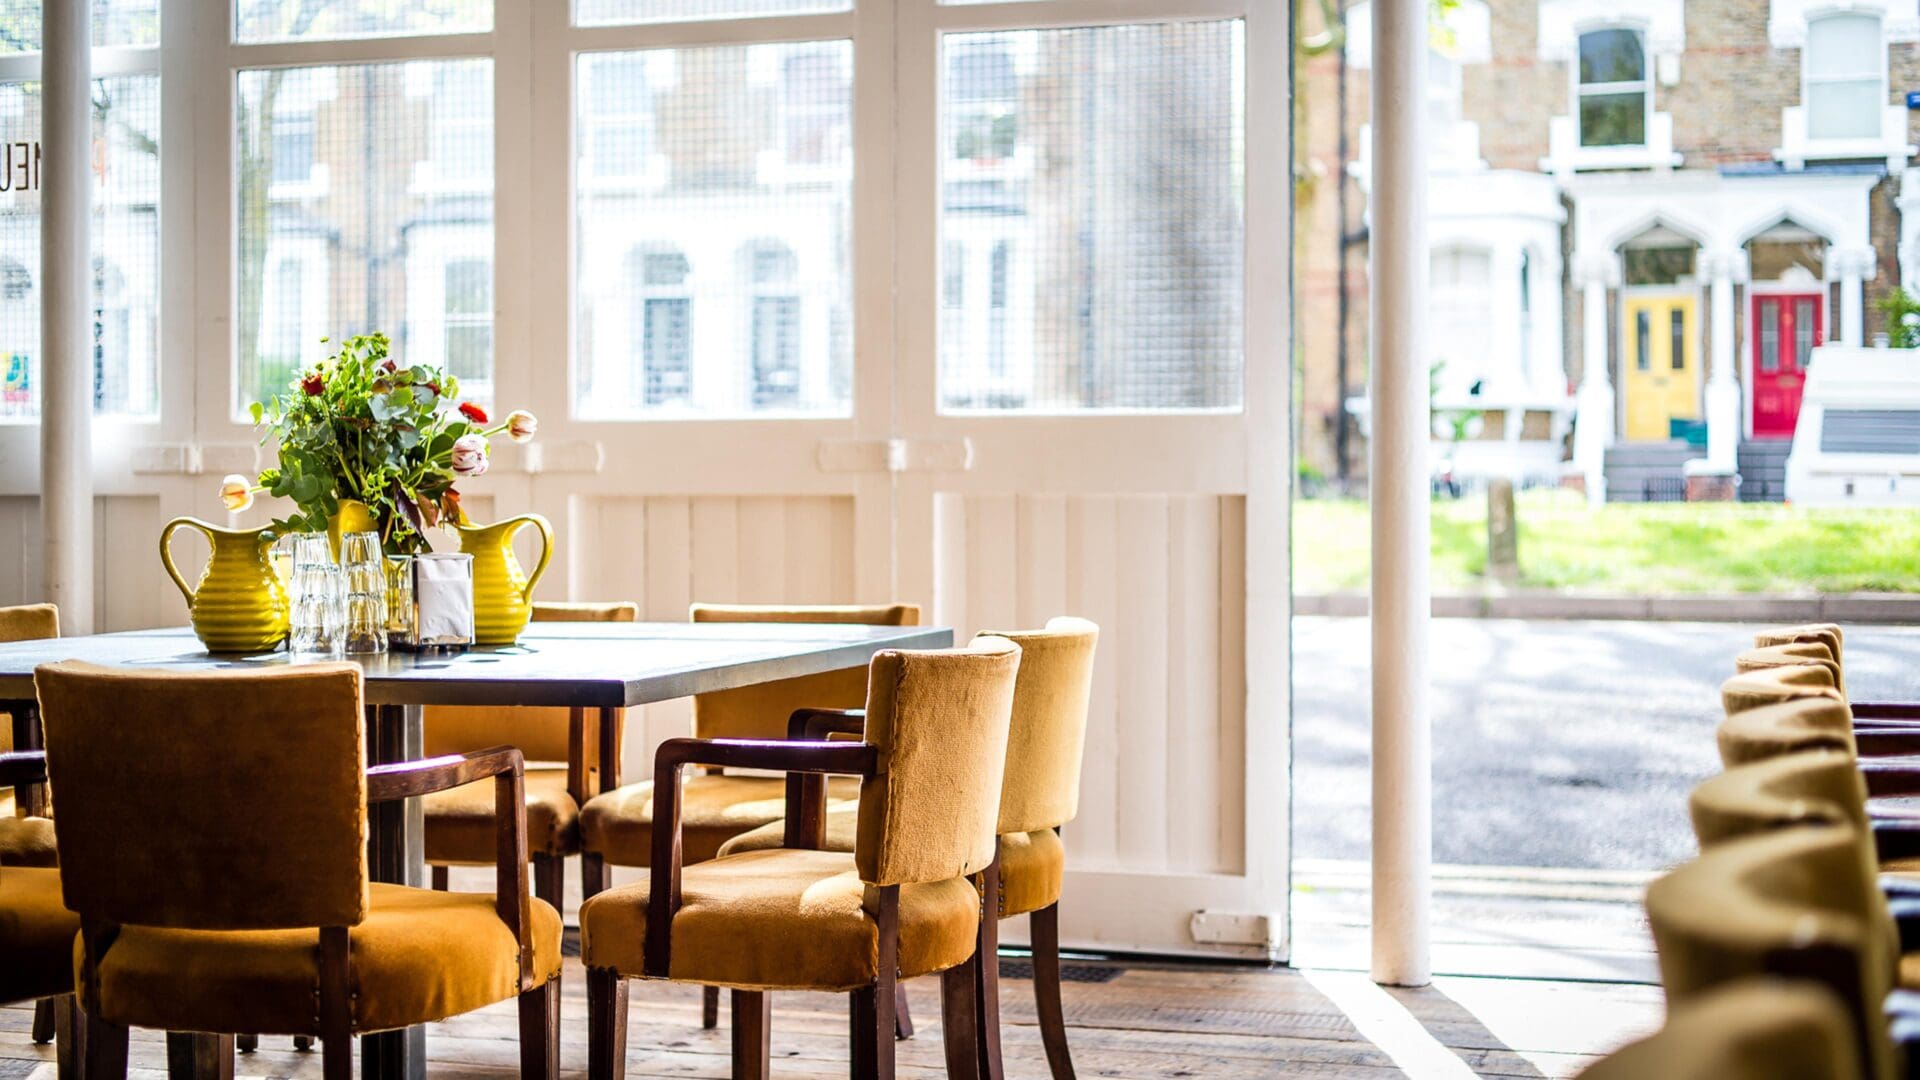 The best restaurants in Hackney | an interior view of Primeur, with a table and armchairs in view, and an arrangement of flowers and small yellow ceramic jugs on the table